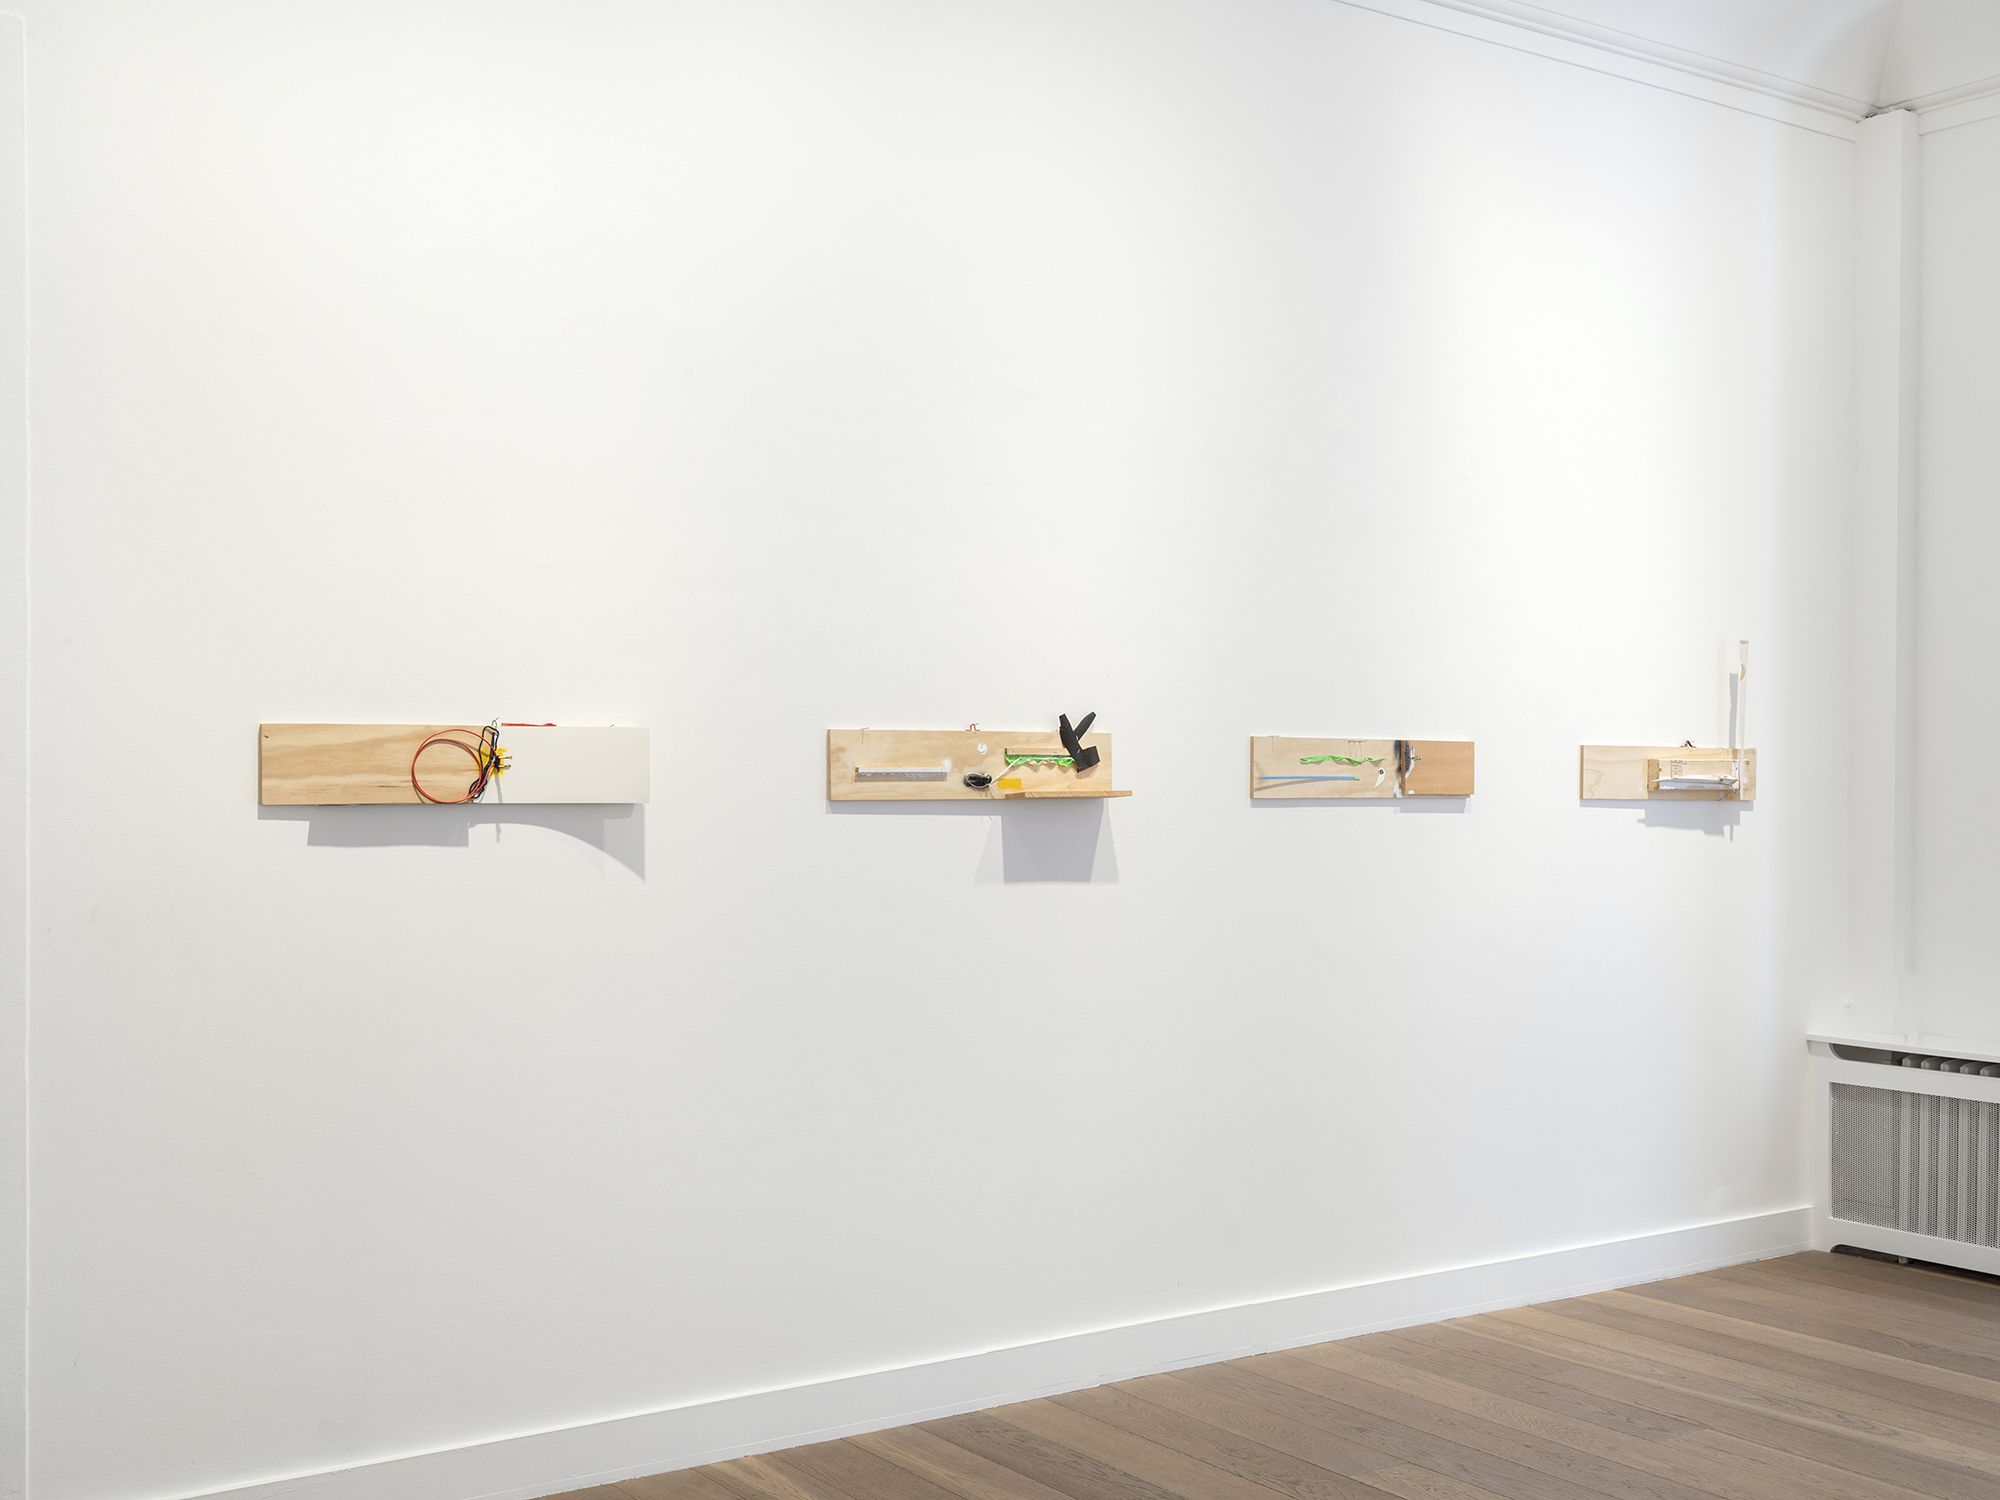 Installation image for Richard Tuttle: My Best, at Galerie Lelong & Co.